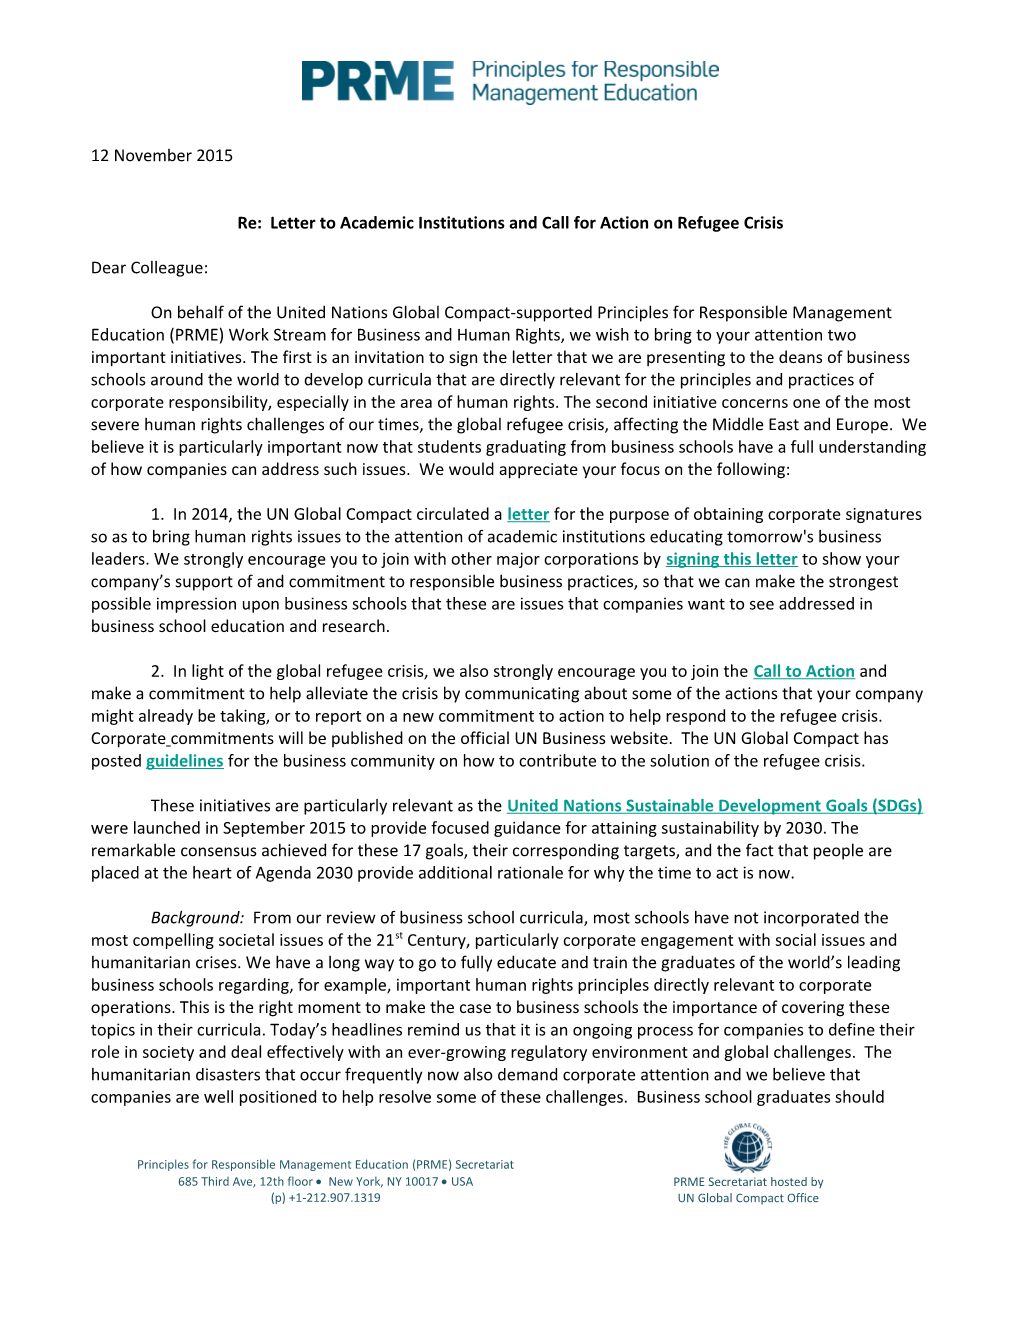 Re: Letter to Academic Institutions and Call for Action on Refugee Crisis